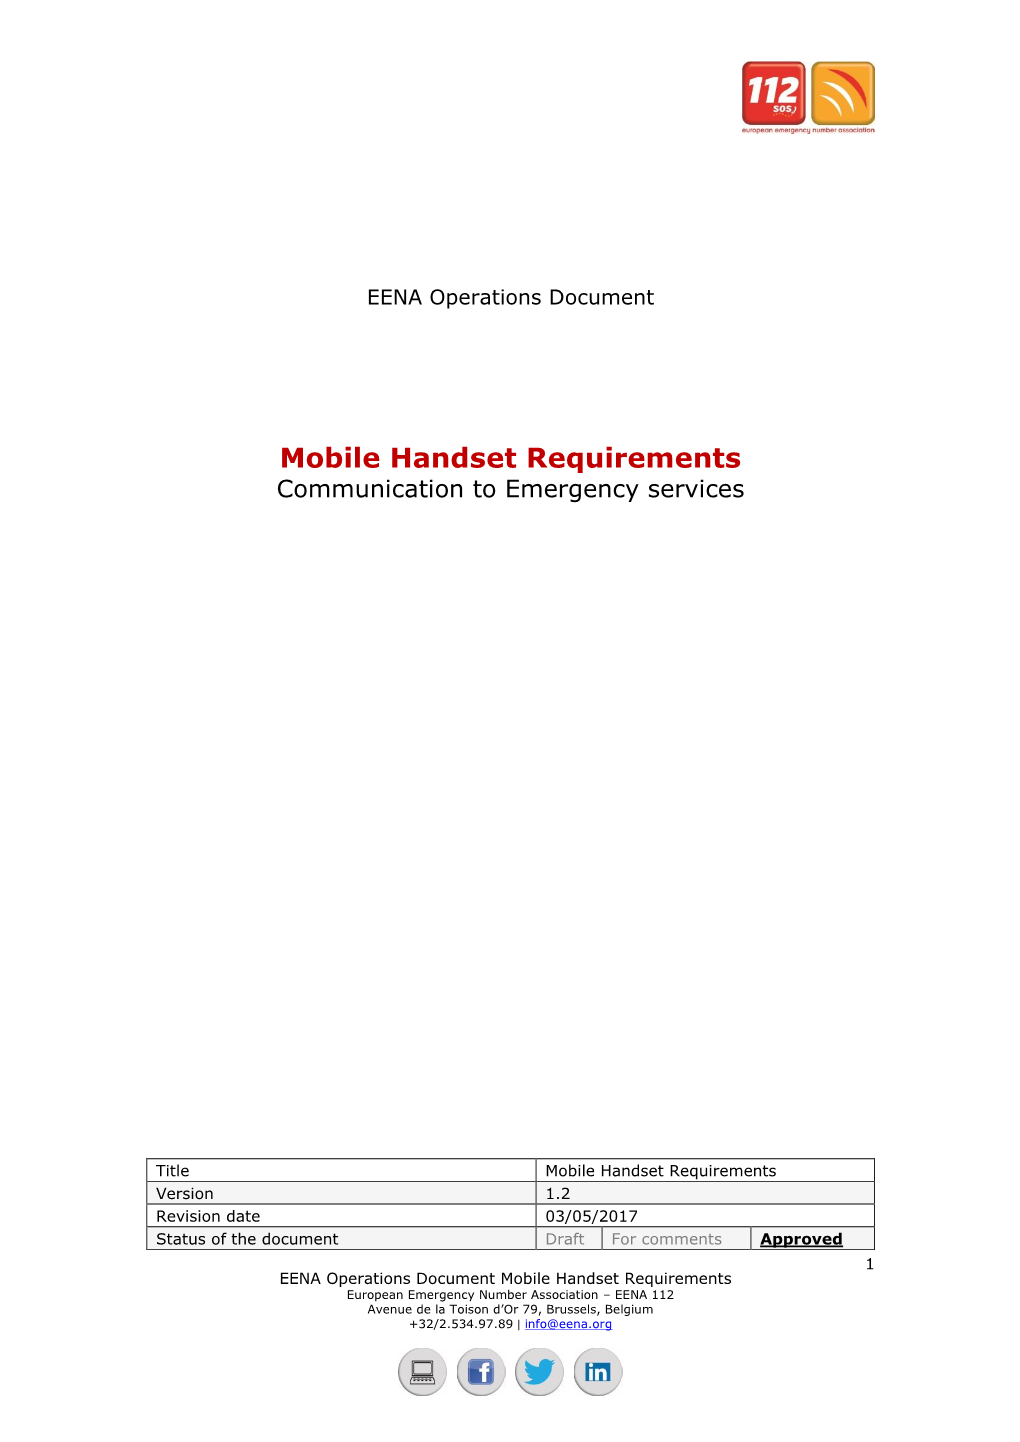 Mobile Handset Requirements Communication to Emergency Services